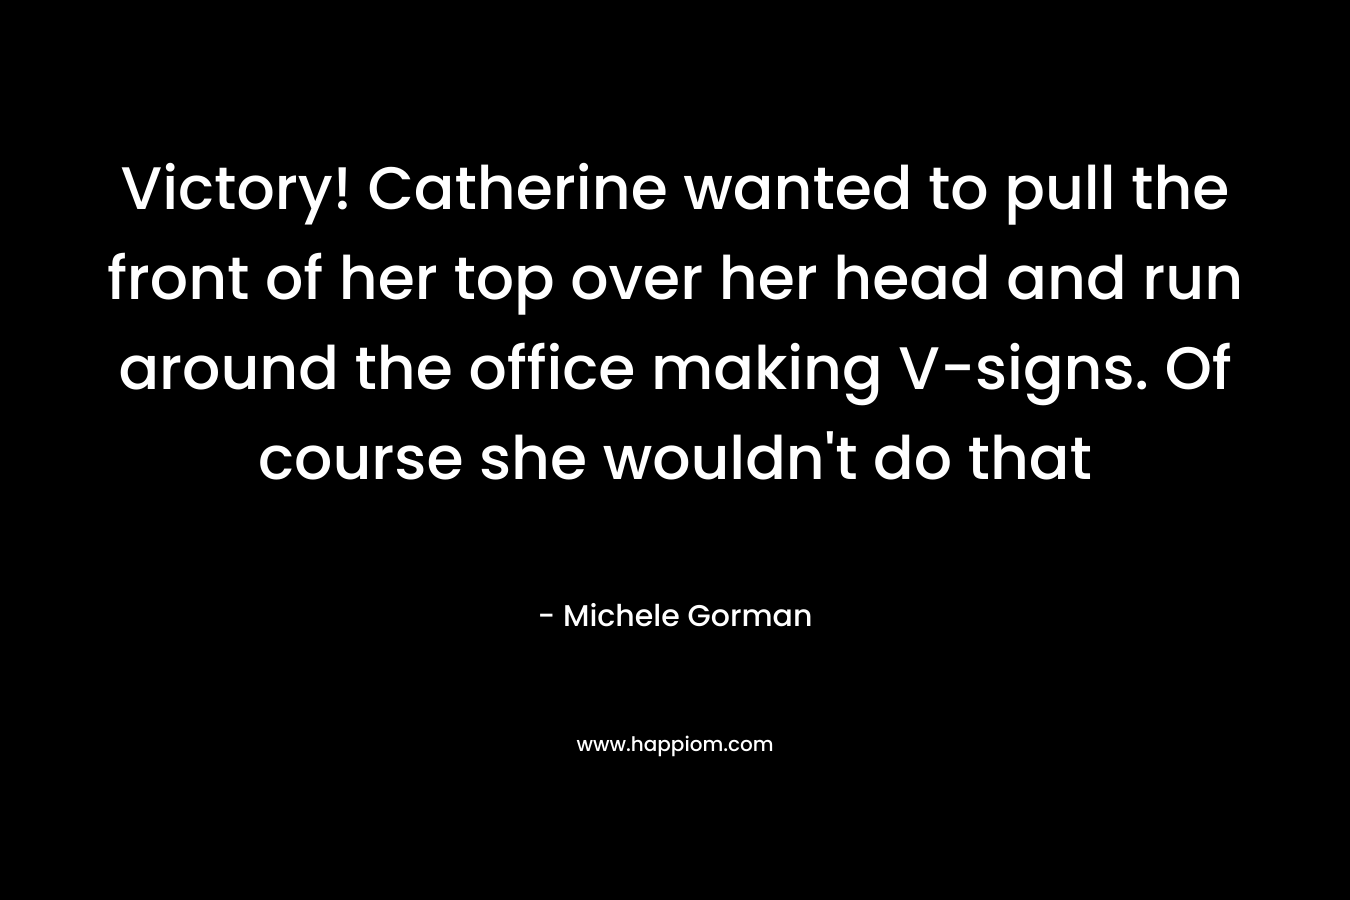 Victory! Catherine wanted to pull the front of her top over her head and run around the office making V-signs. Of course she wouldn’t do that – Michele Gorman